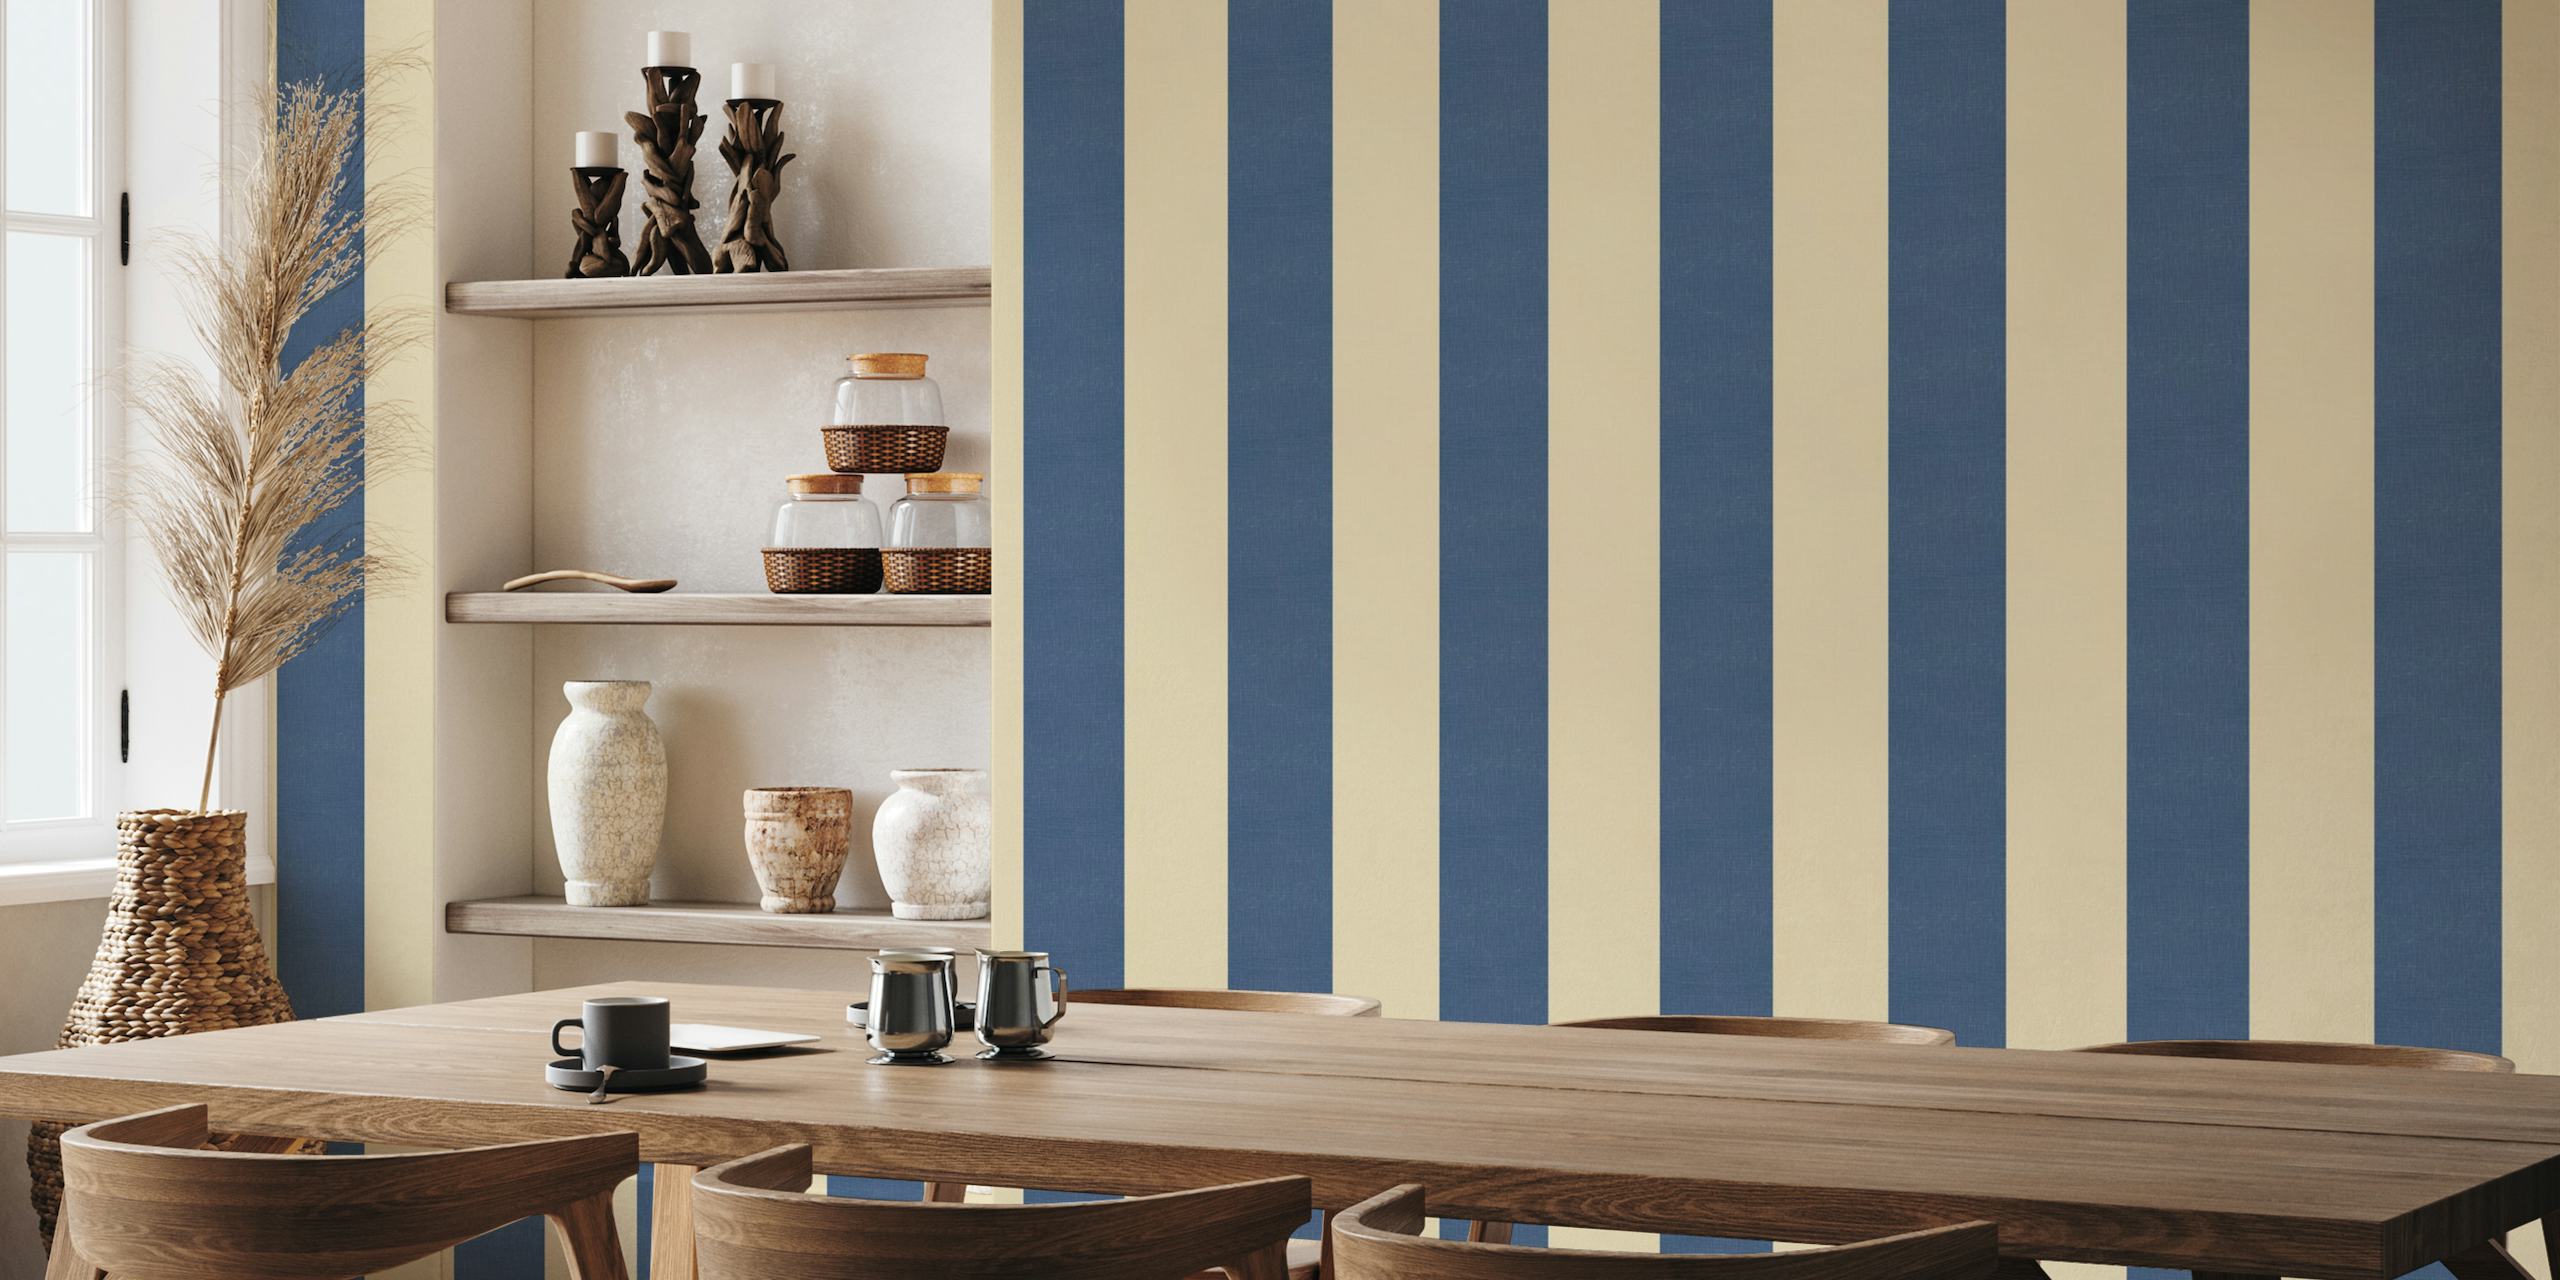 Wide textured stripes - navy blue and beige behang